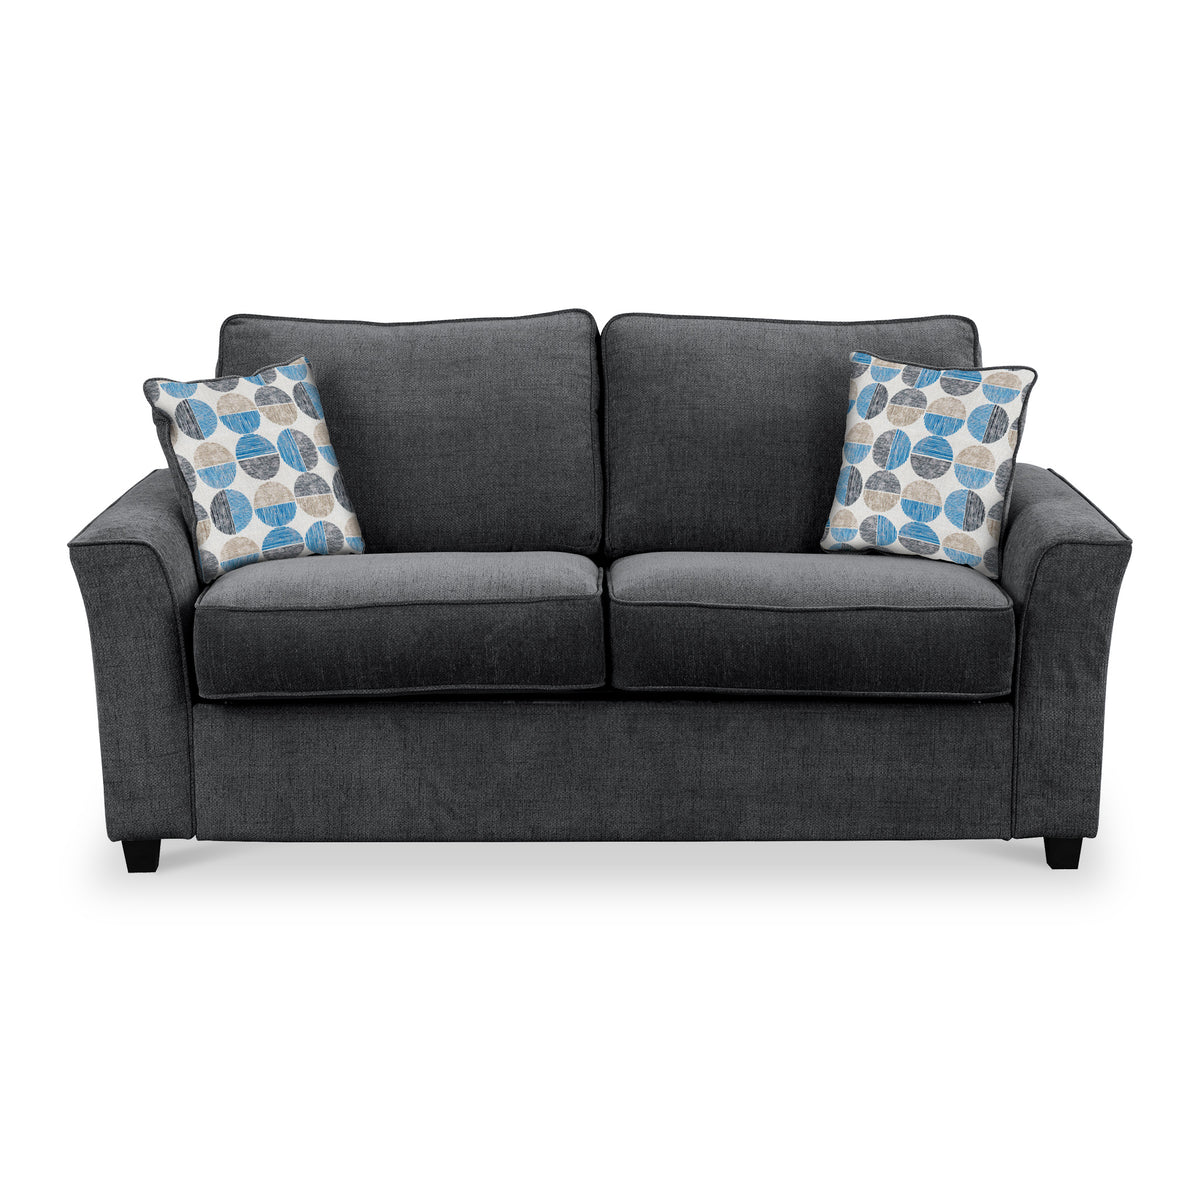 Abbott 2 Seater Sofabed in Charcoal with Rufus Blue Cushions by Roseland Furniture